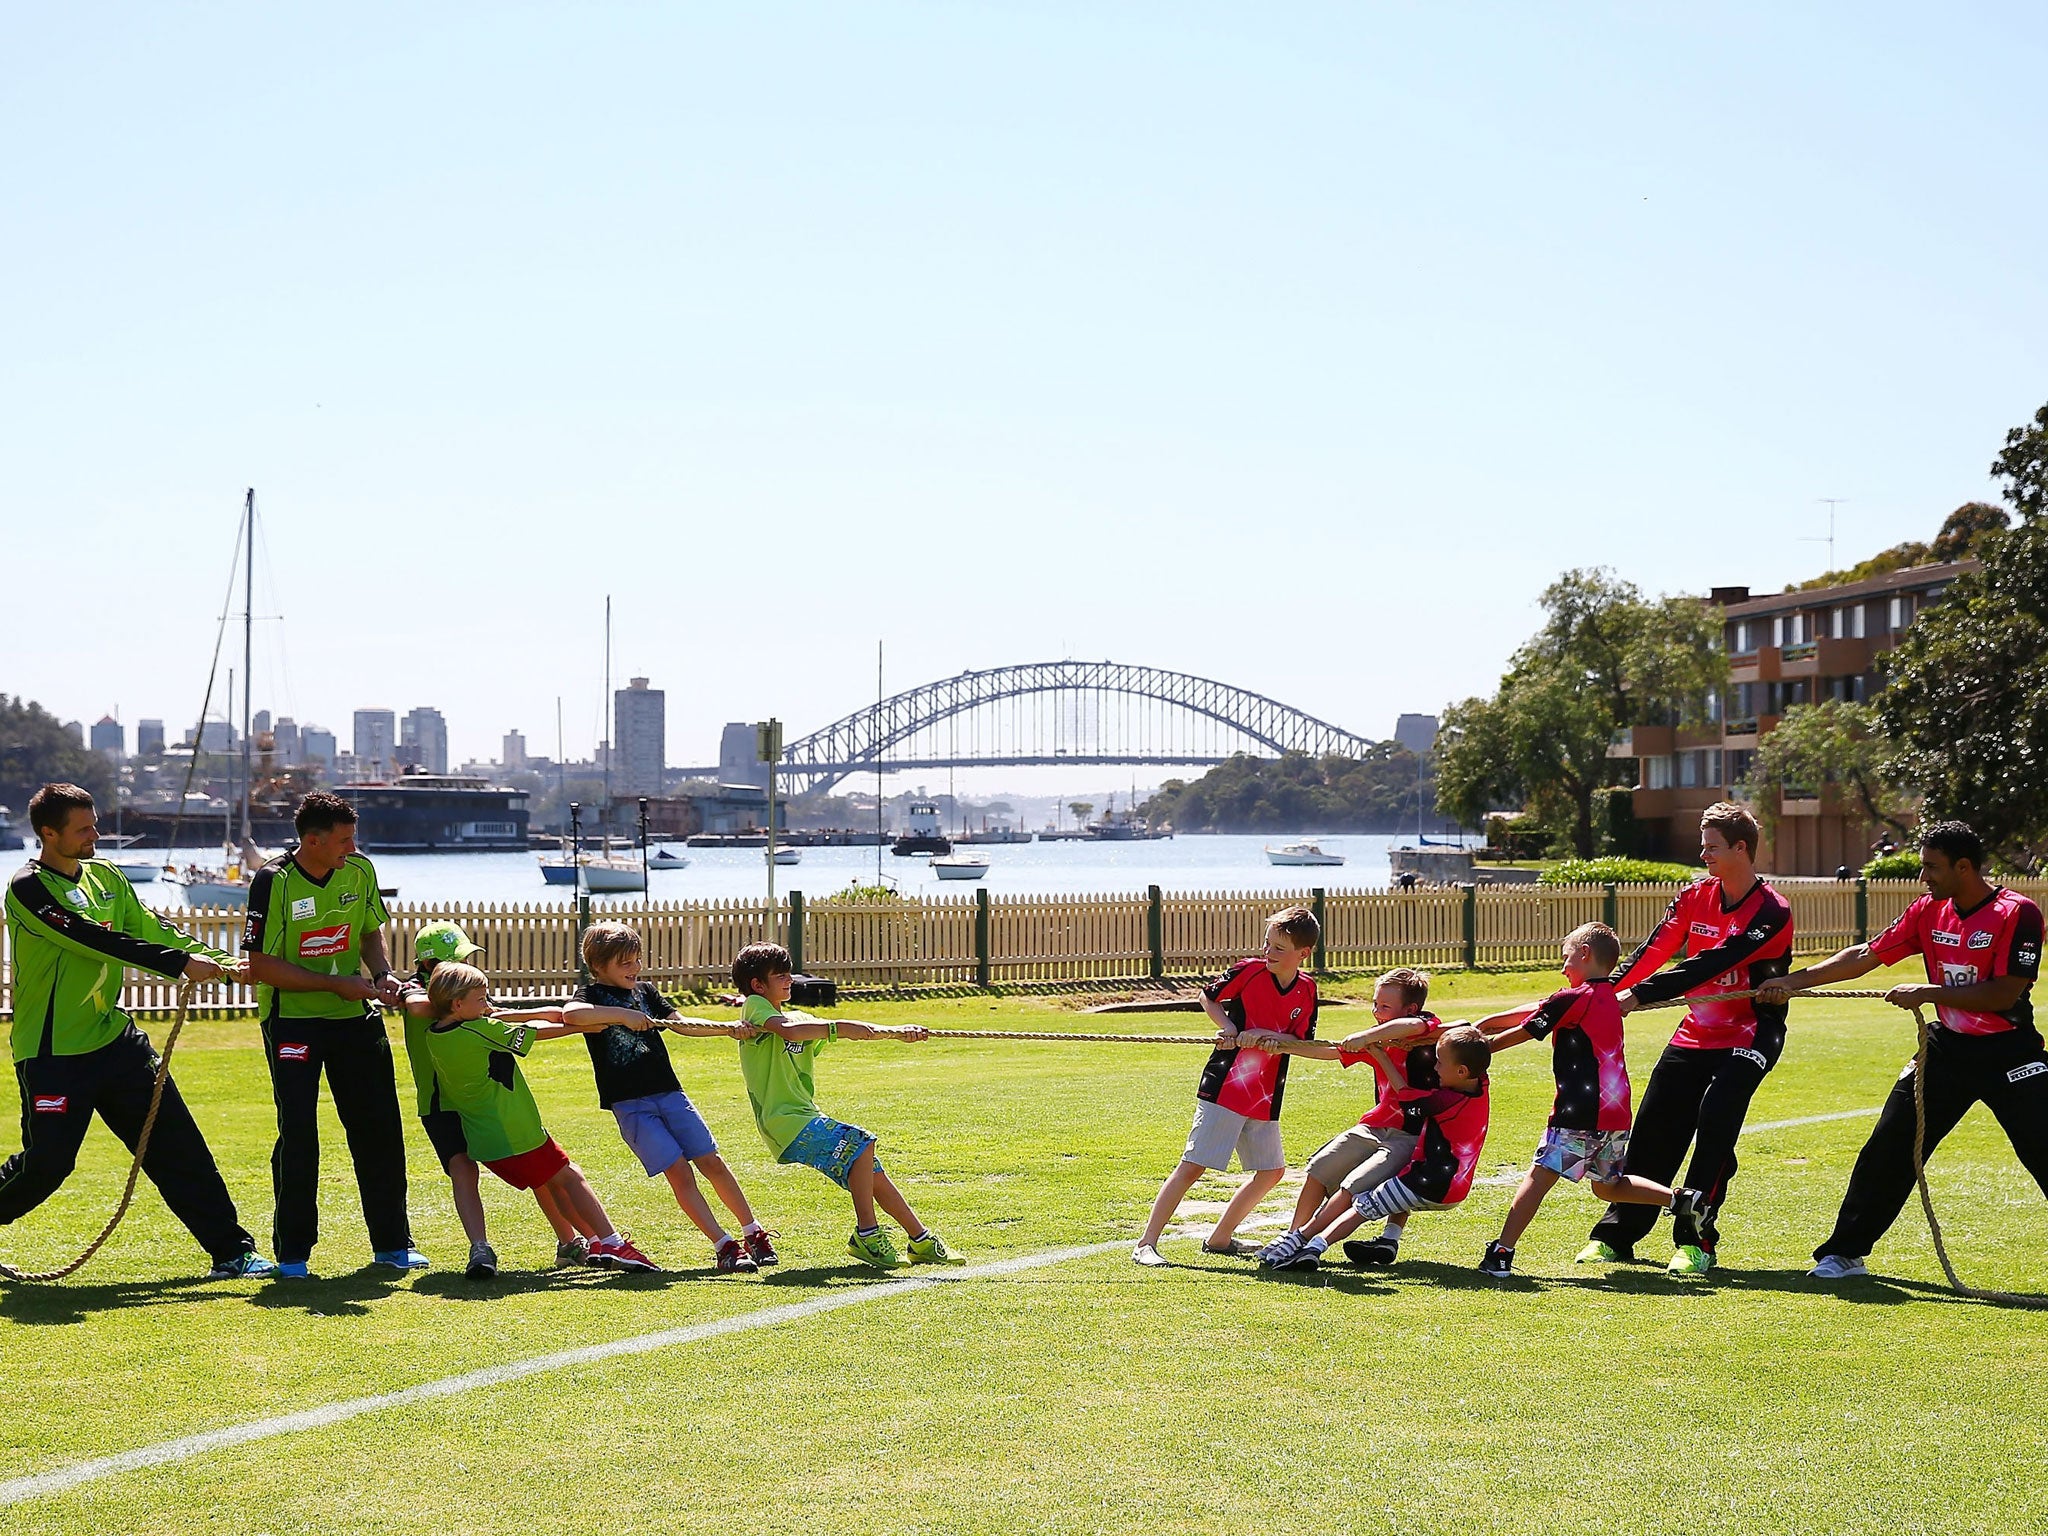 Mike Hussey and Dirk Nannes, of the Sydney Thunder (left), and young fans test the pull of the Big Bash League against Sydney Sixers' Steve Smith and Ravi Bopara